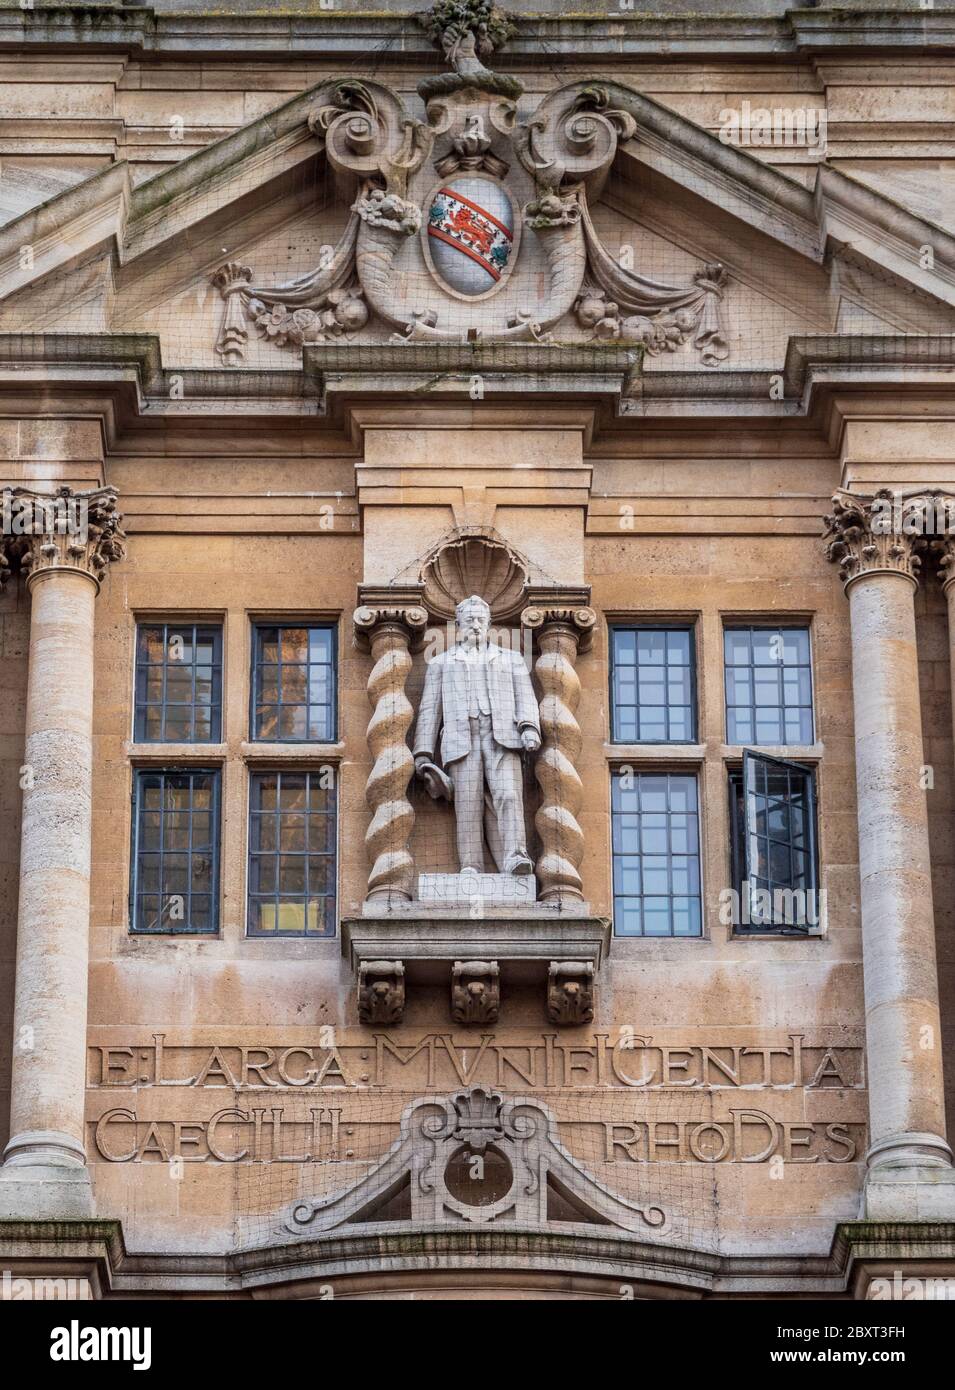 Cecil Rhodes Statue Oxford - the controversial statue of Cecil Rhodes on the Oriel College building in central Oxford UK Stock Photo